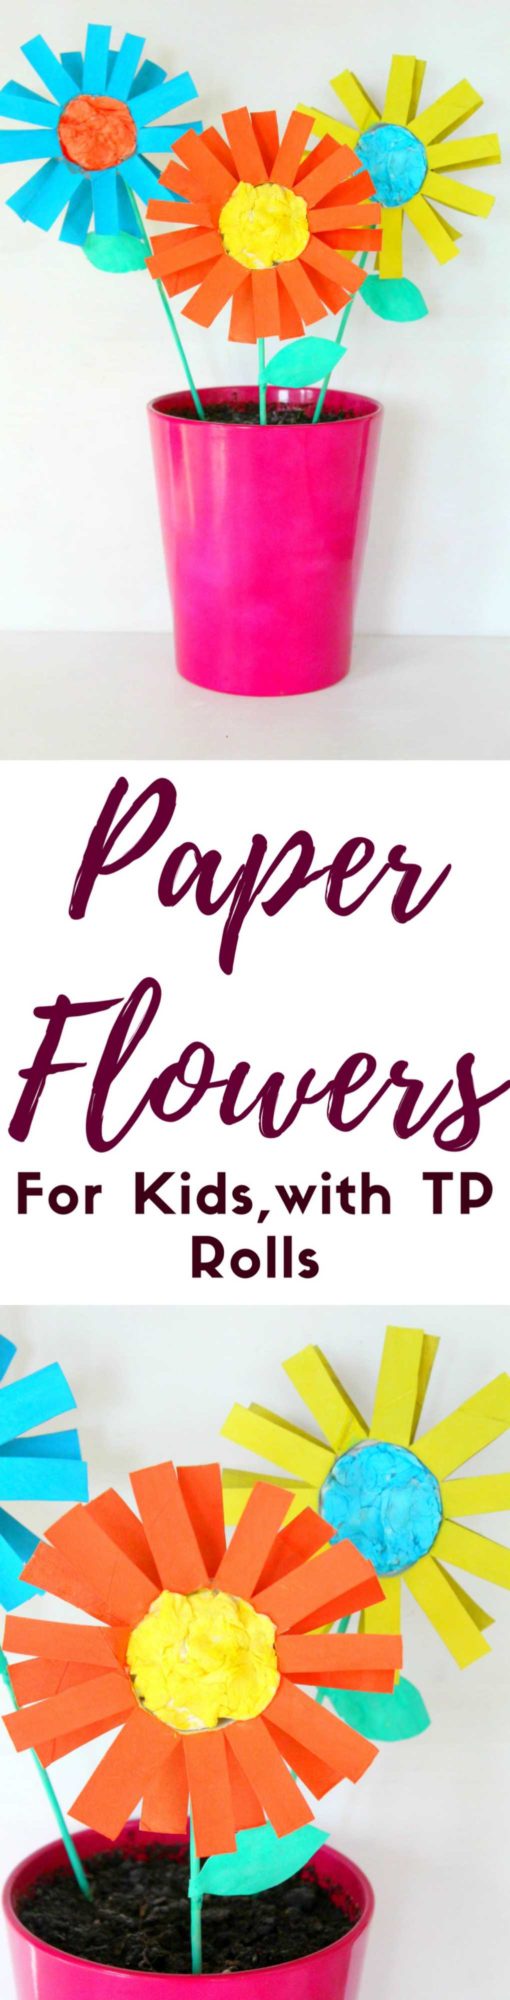 Paper flowers for kids